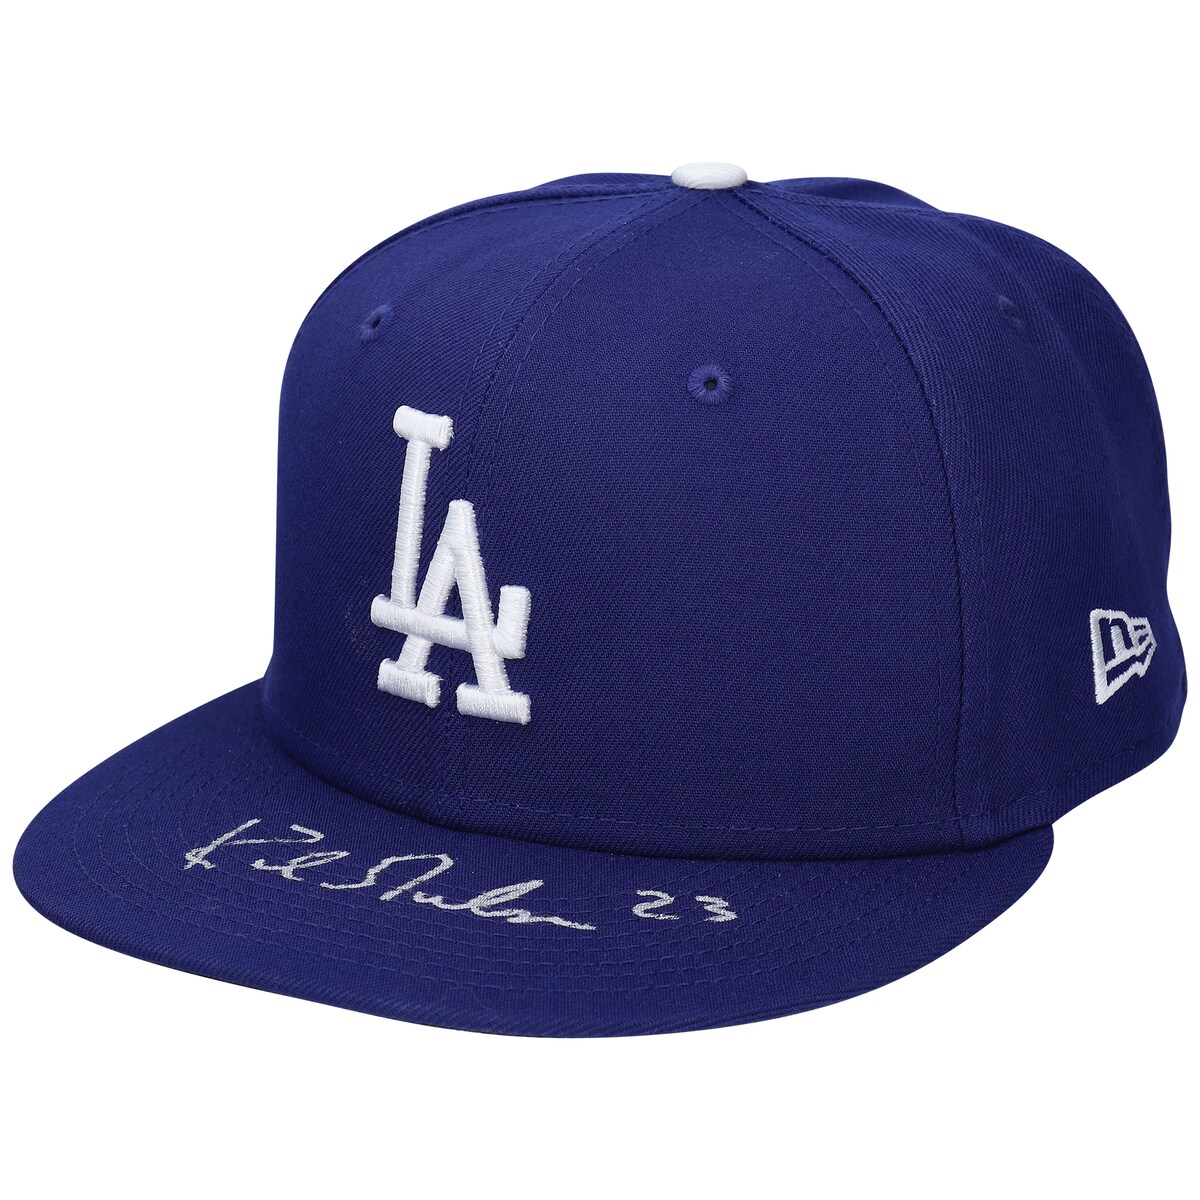 Take your collection of Los Angeles Dodgers memorabilia to the next level with this Kirk Gibson autographed New Era Baseball Cap. Whether displayed in your home or office, it's the perfect way to highlight your passion for the Los Angeles Dodgers for years to come.Obtained under the auspices of the Major League Baseball Authentication Program and can be verified by its numbered hologram at MLB.comHand-signed autographSignature may varyBrand: Fanatics AuthenticOfficially licensedIndividually numbered, tamper-evident hologram from Fanatics Authentic ensures the product purchased is authentic and eliminates any possibility of duplication or fraud. Hologram can be reviewed online.